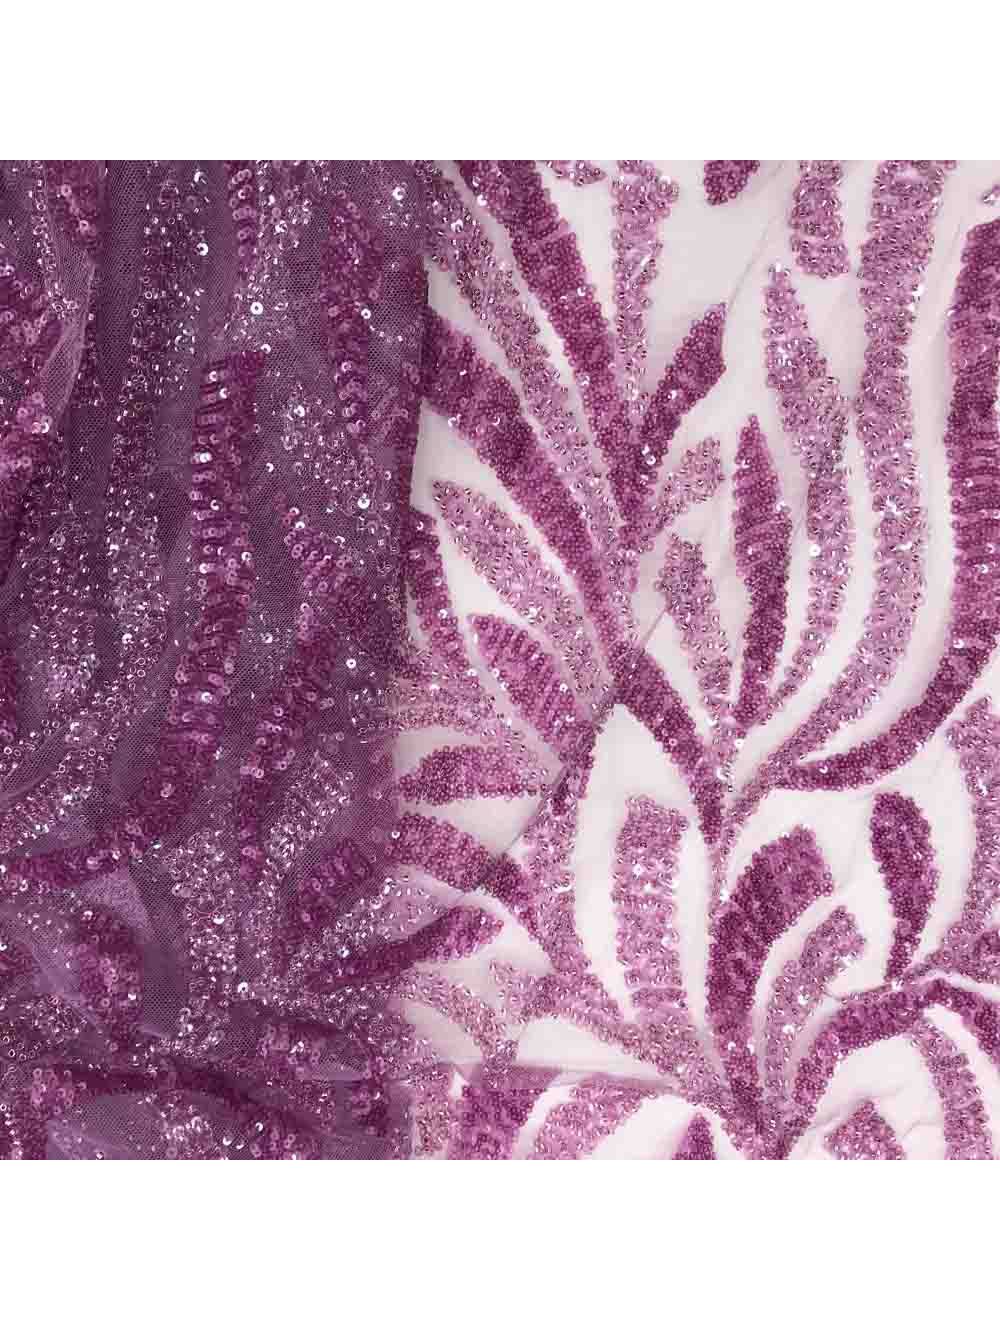 Wine Sequins Embroidery Net Fabric with 60 Inches Width